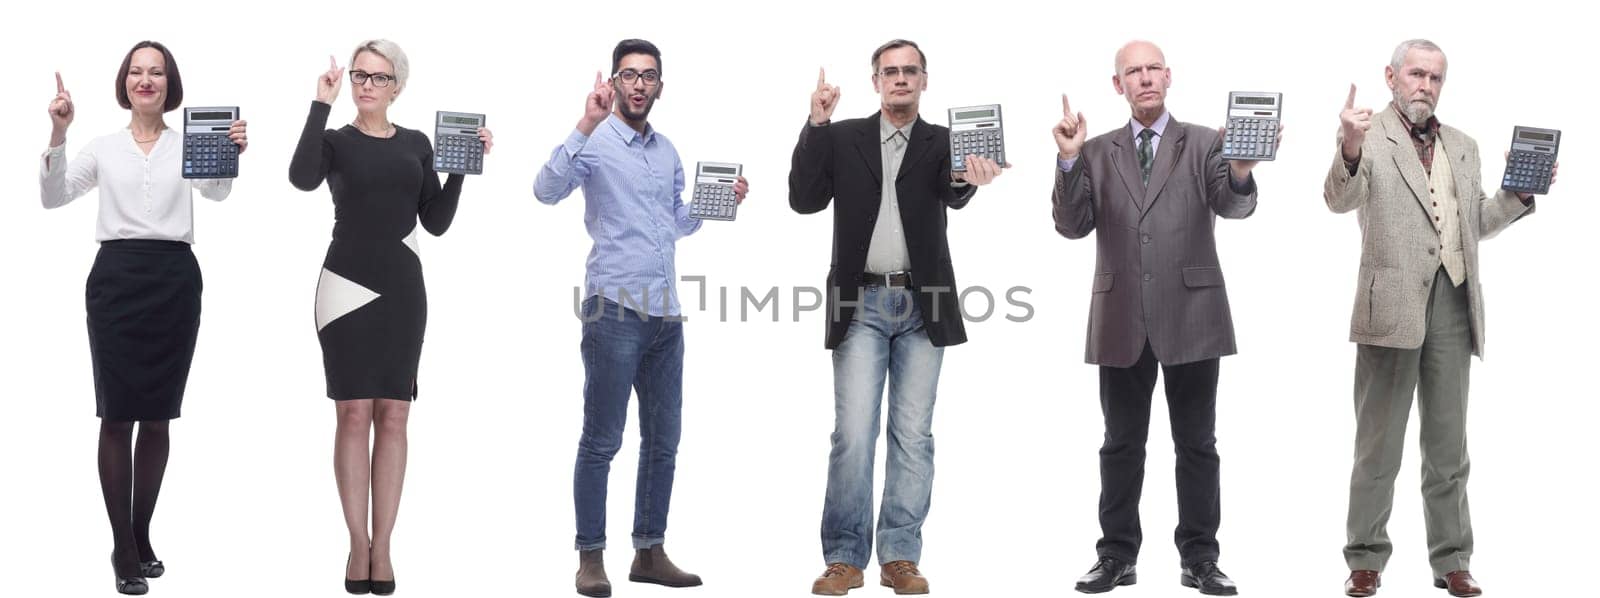 Collage of people with calculator isolated on white by asdf